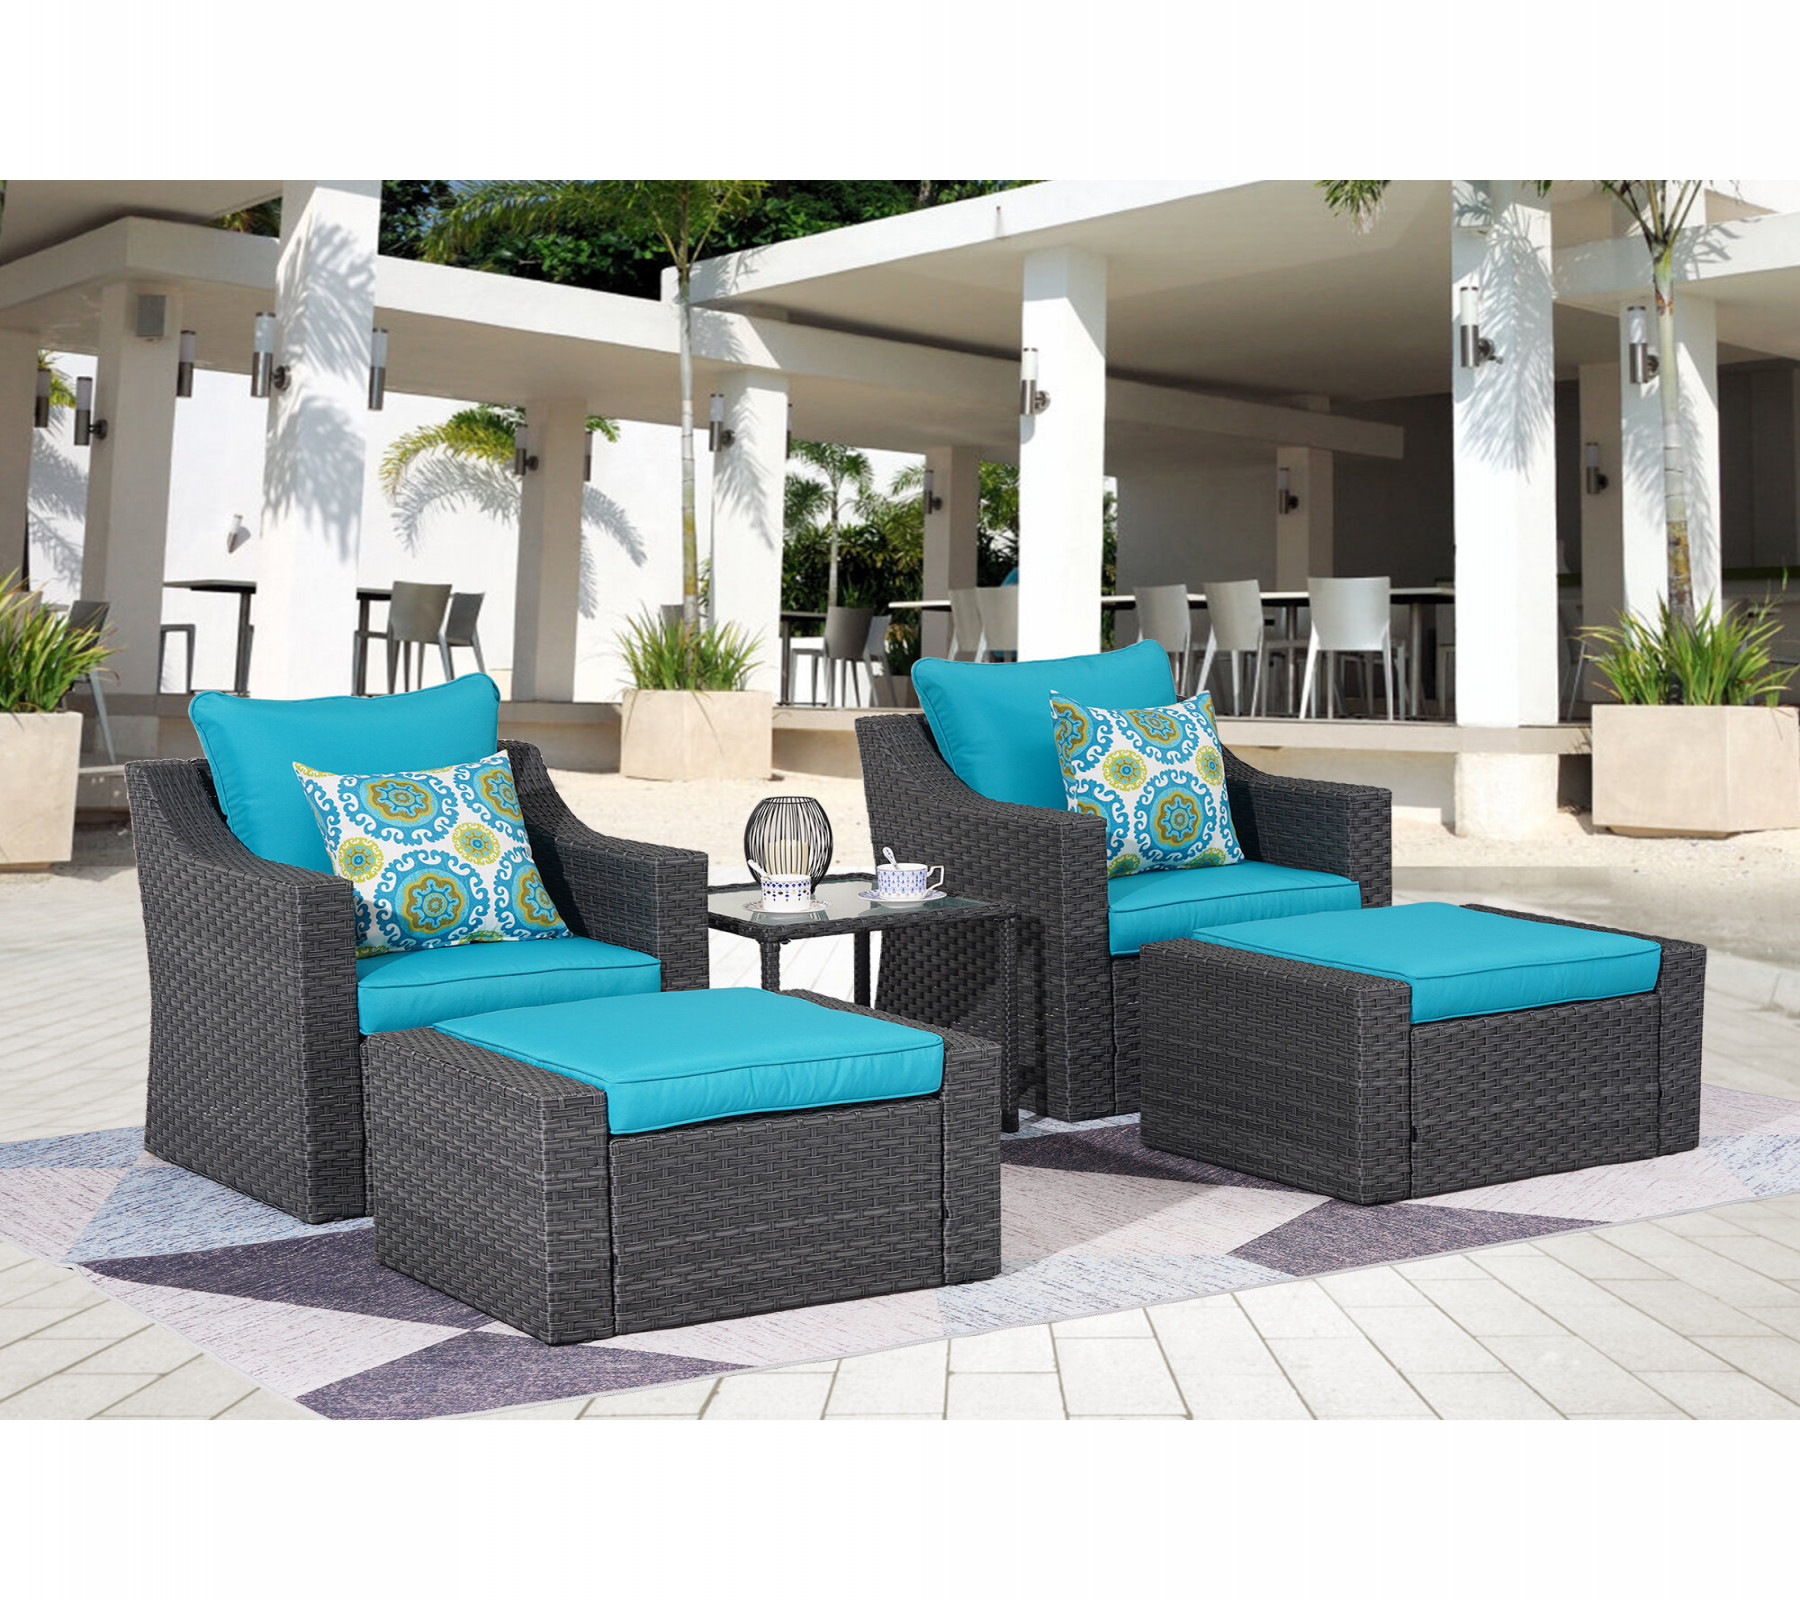 BIG SALE] Closeout: Outdoor Furniture You